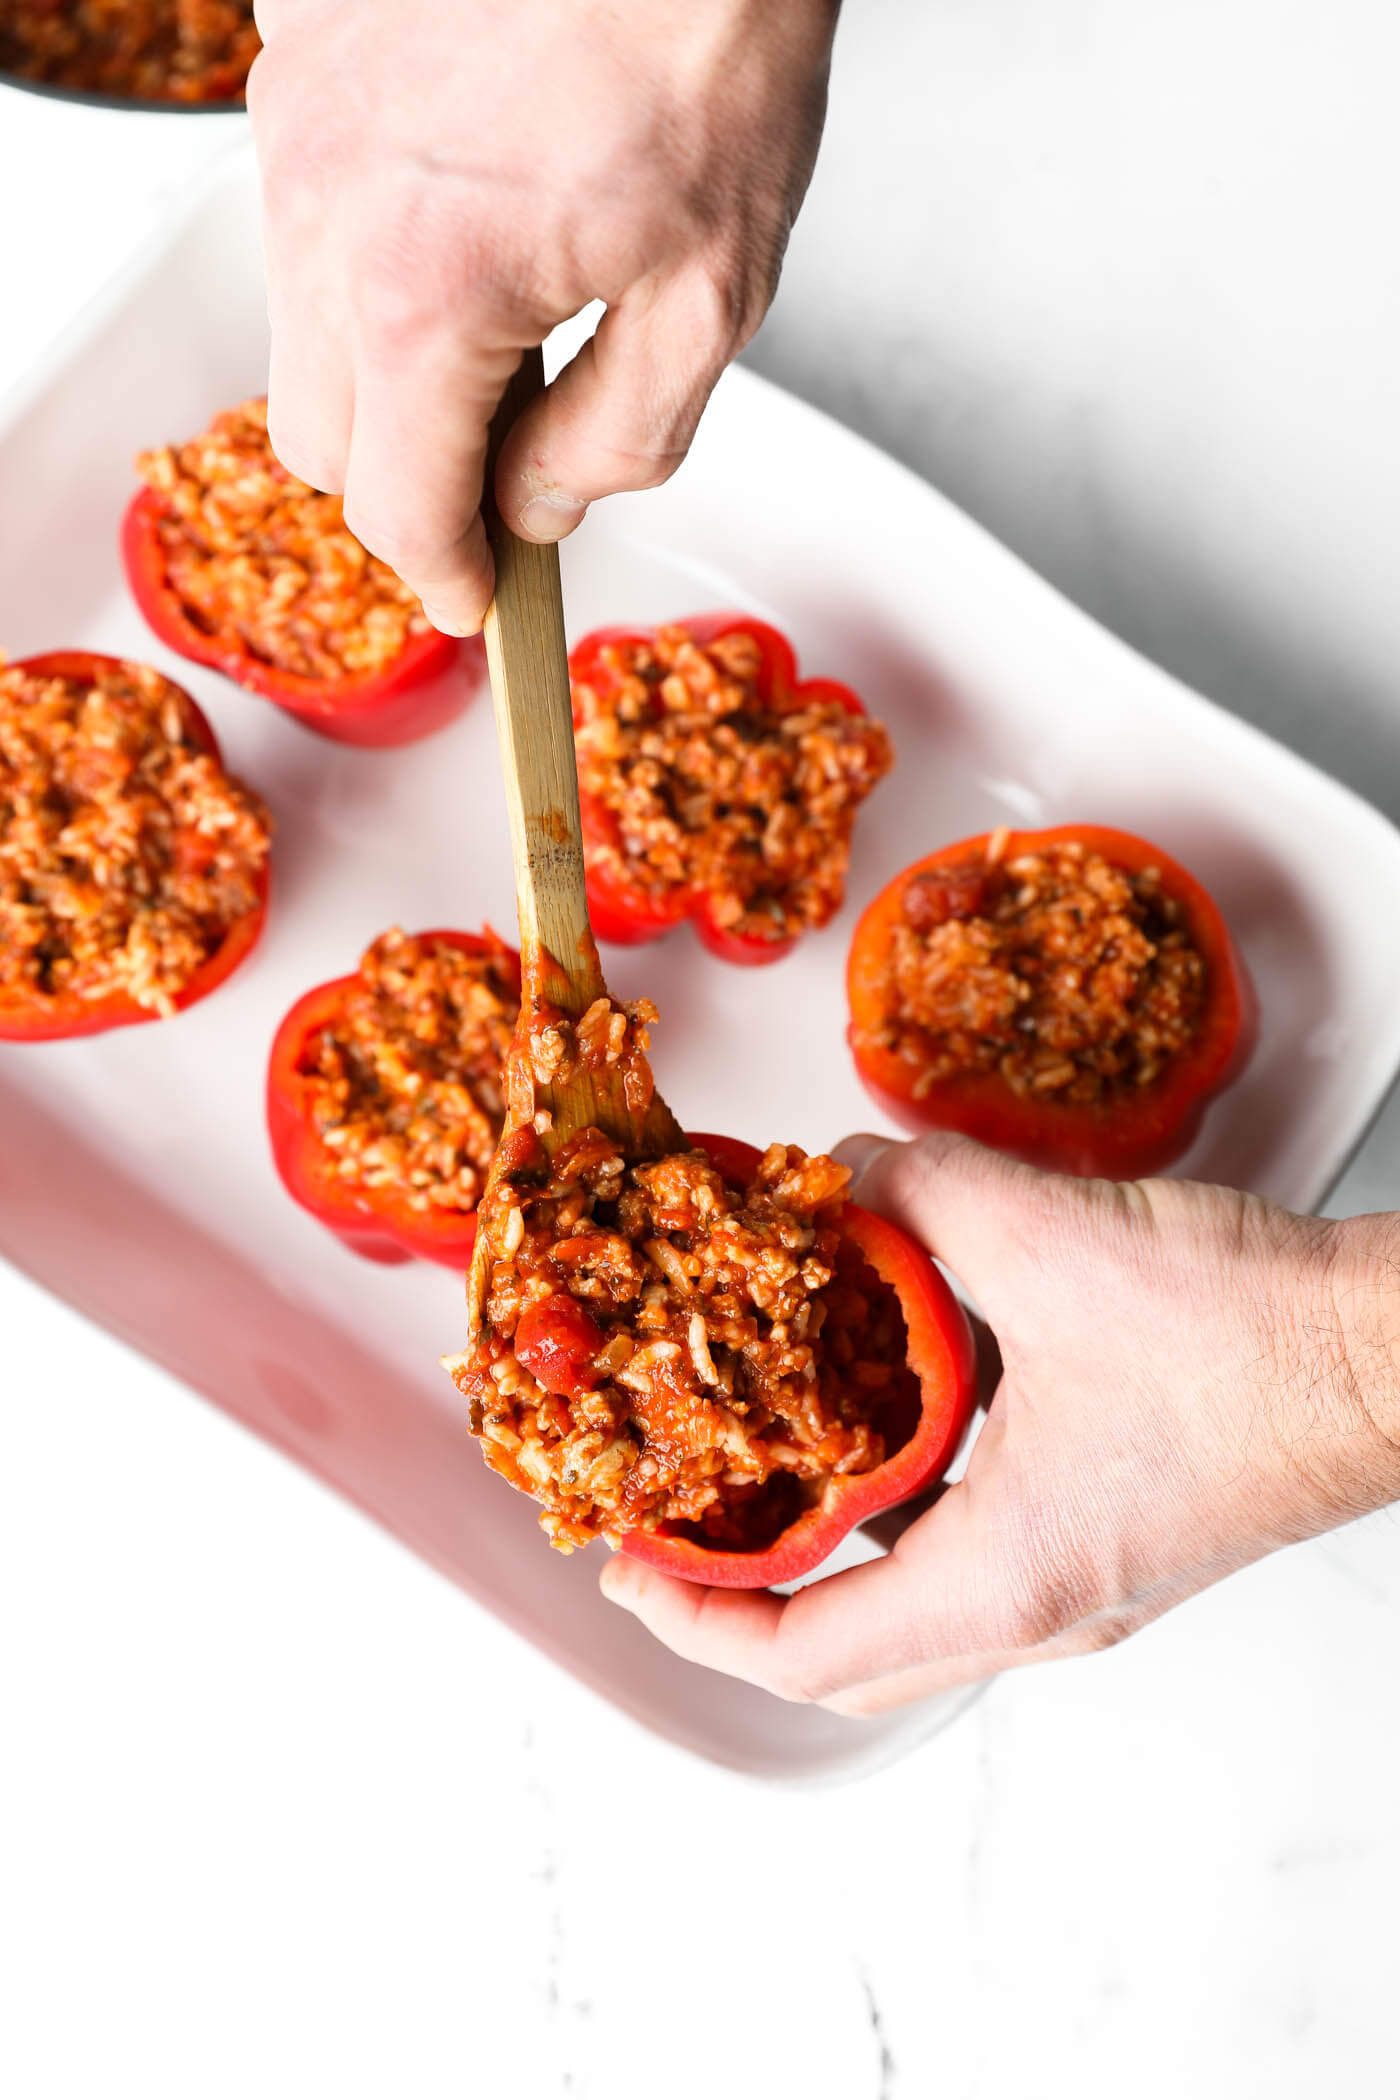 A hand holding one bell pepper and using a wooden spoon to add a scoop of the filling mixture to the uncooked pepper.